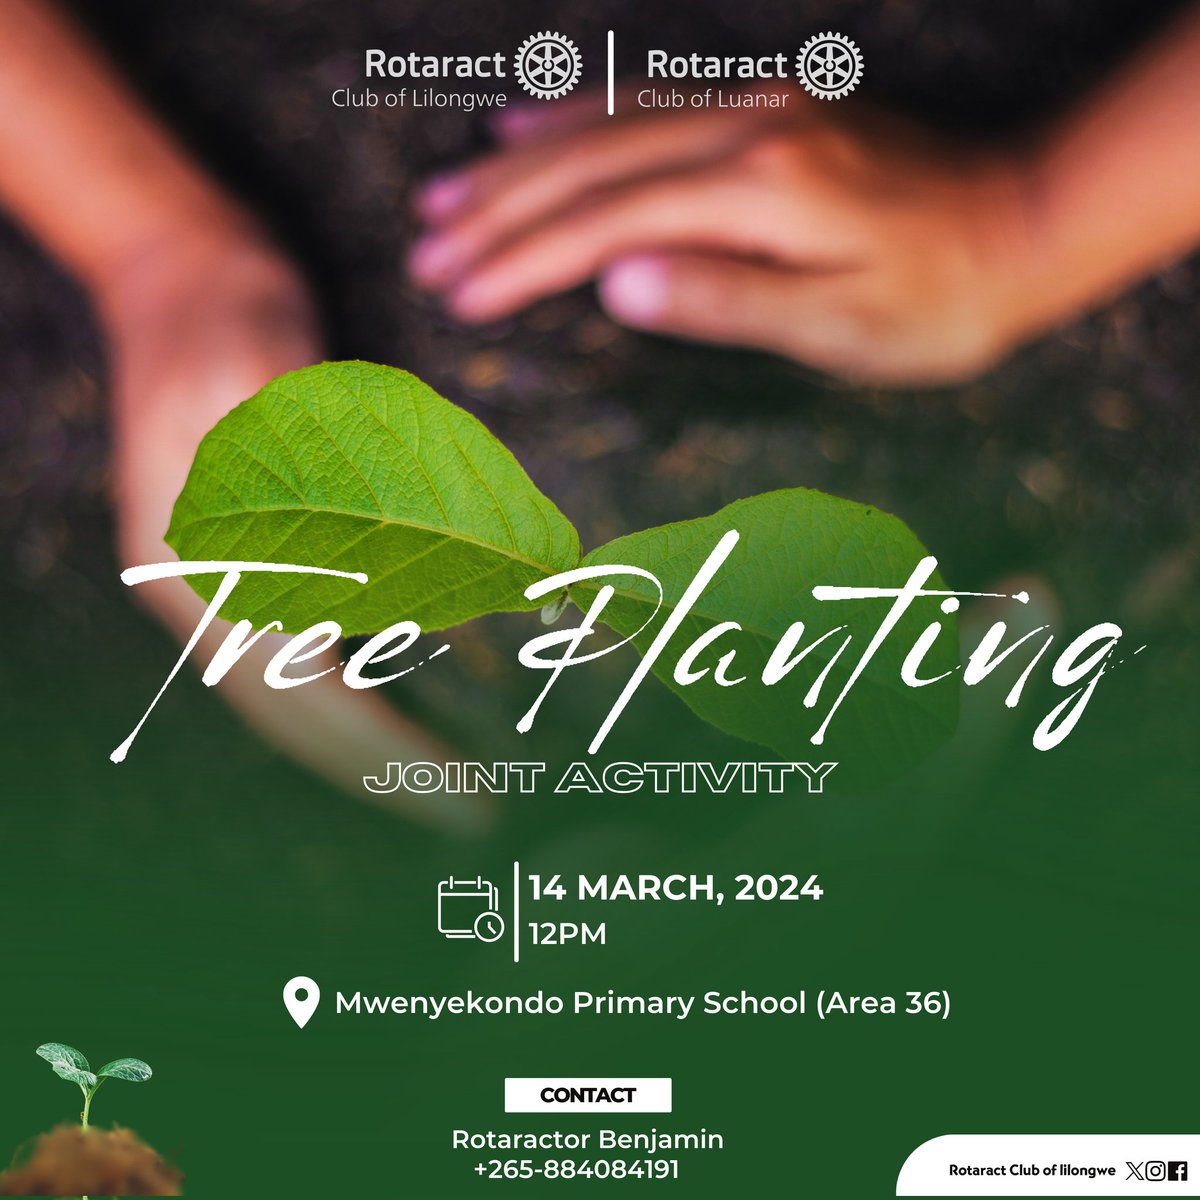 As we are Celebrating Rotaract Week, we will be having a Tree planting activity together with the Rotaract Club of Luanar CTC at Mwenyekondo Primary School ( Area 36 ) on the 14th of March at 12. You are all invited!!
#RotaractWeek
#RACLilongwe
#RotaryInternational
#TreePlanting